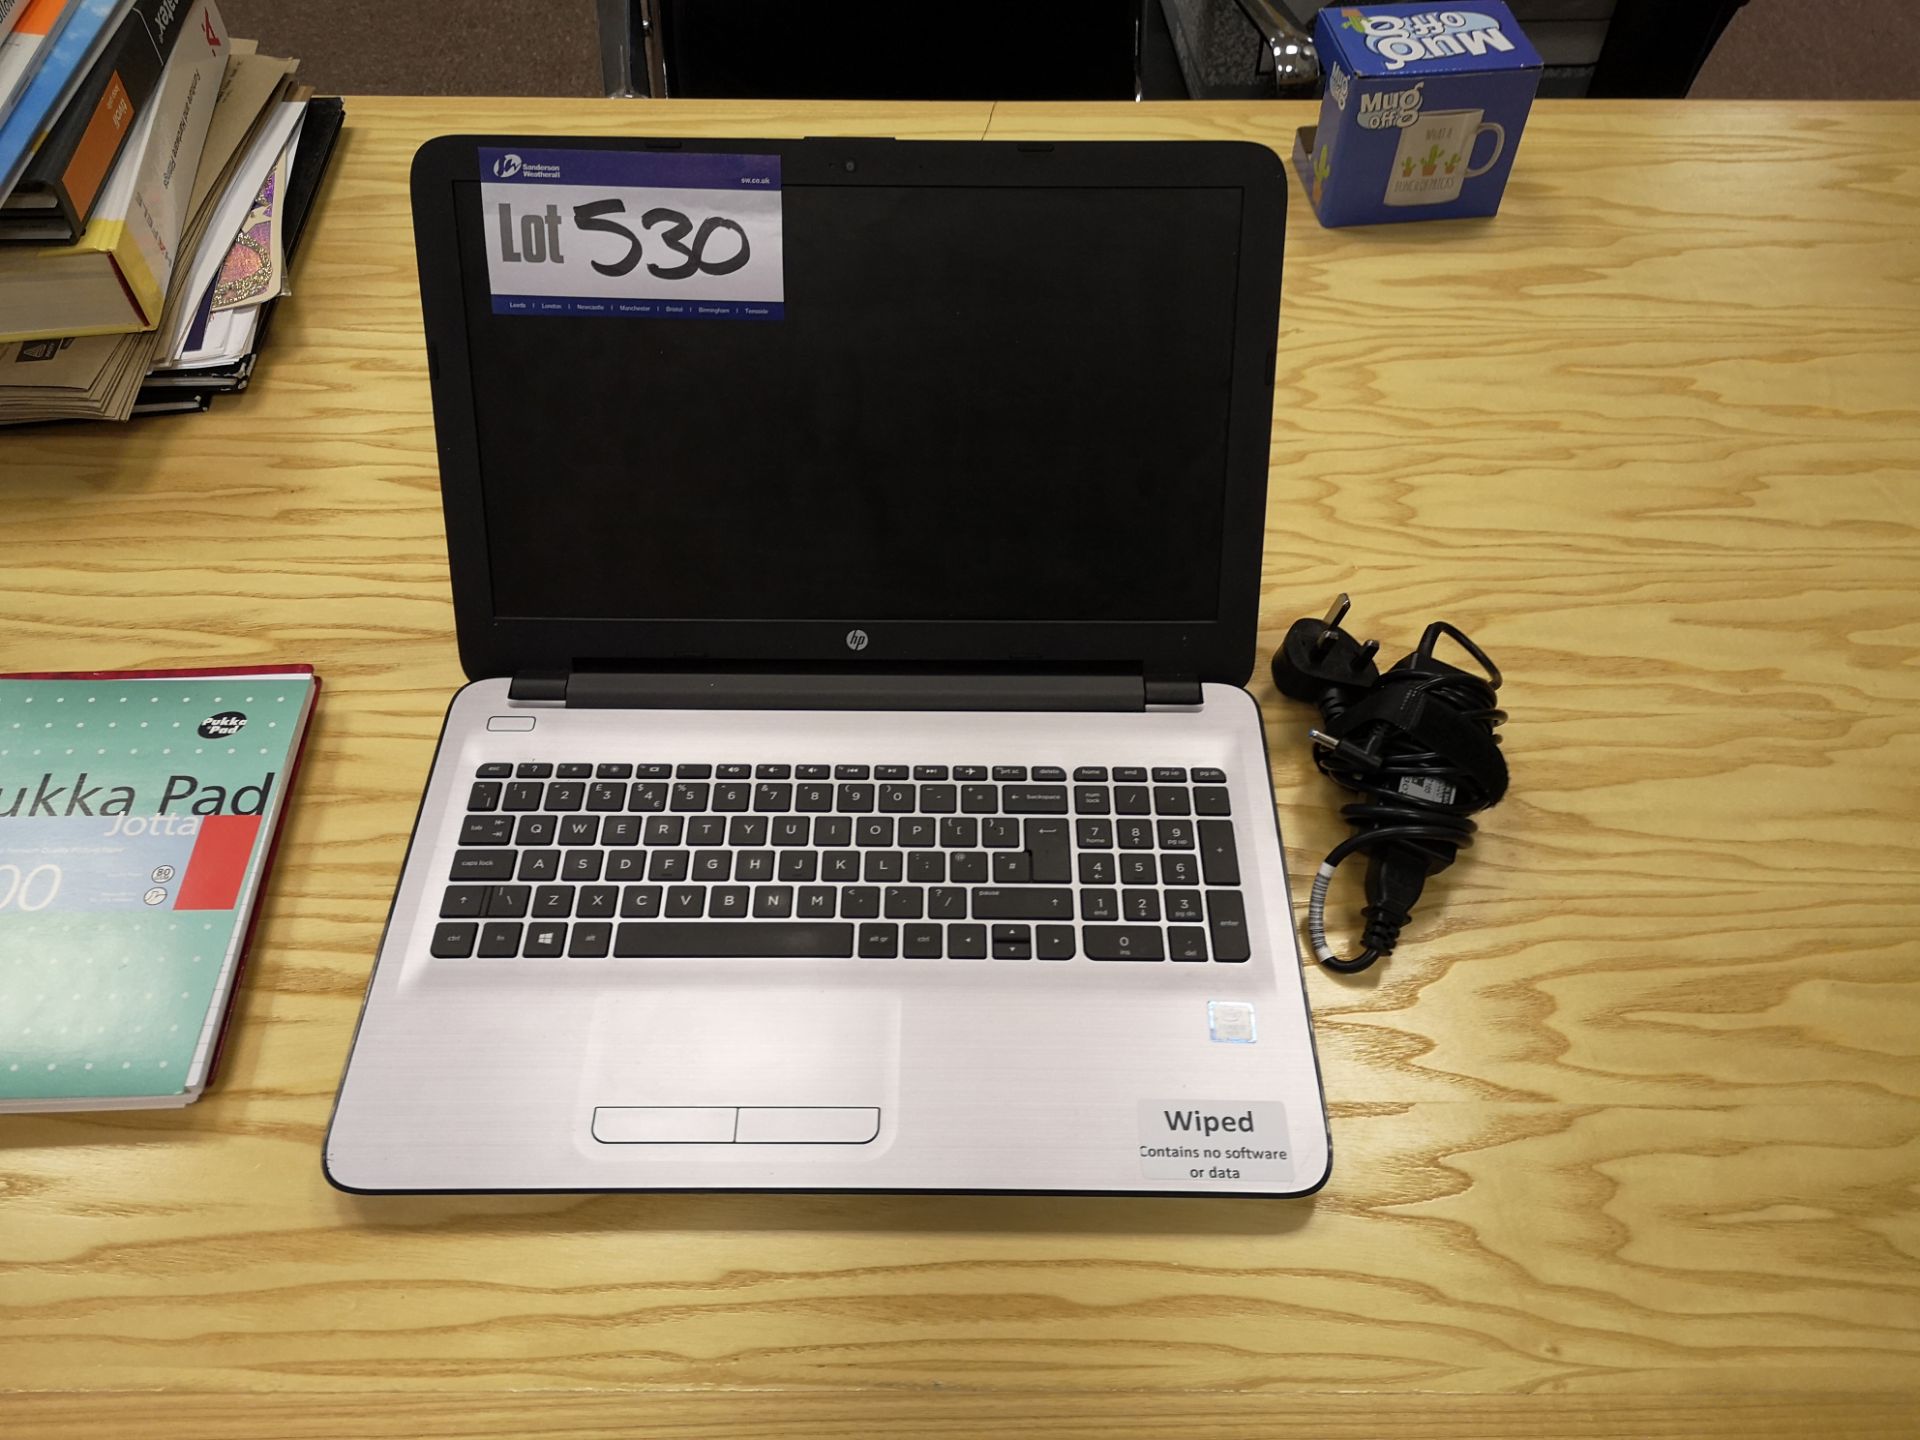 HP Z50 G5 Laptop (data on hard drive erased), with